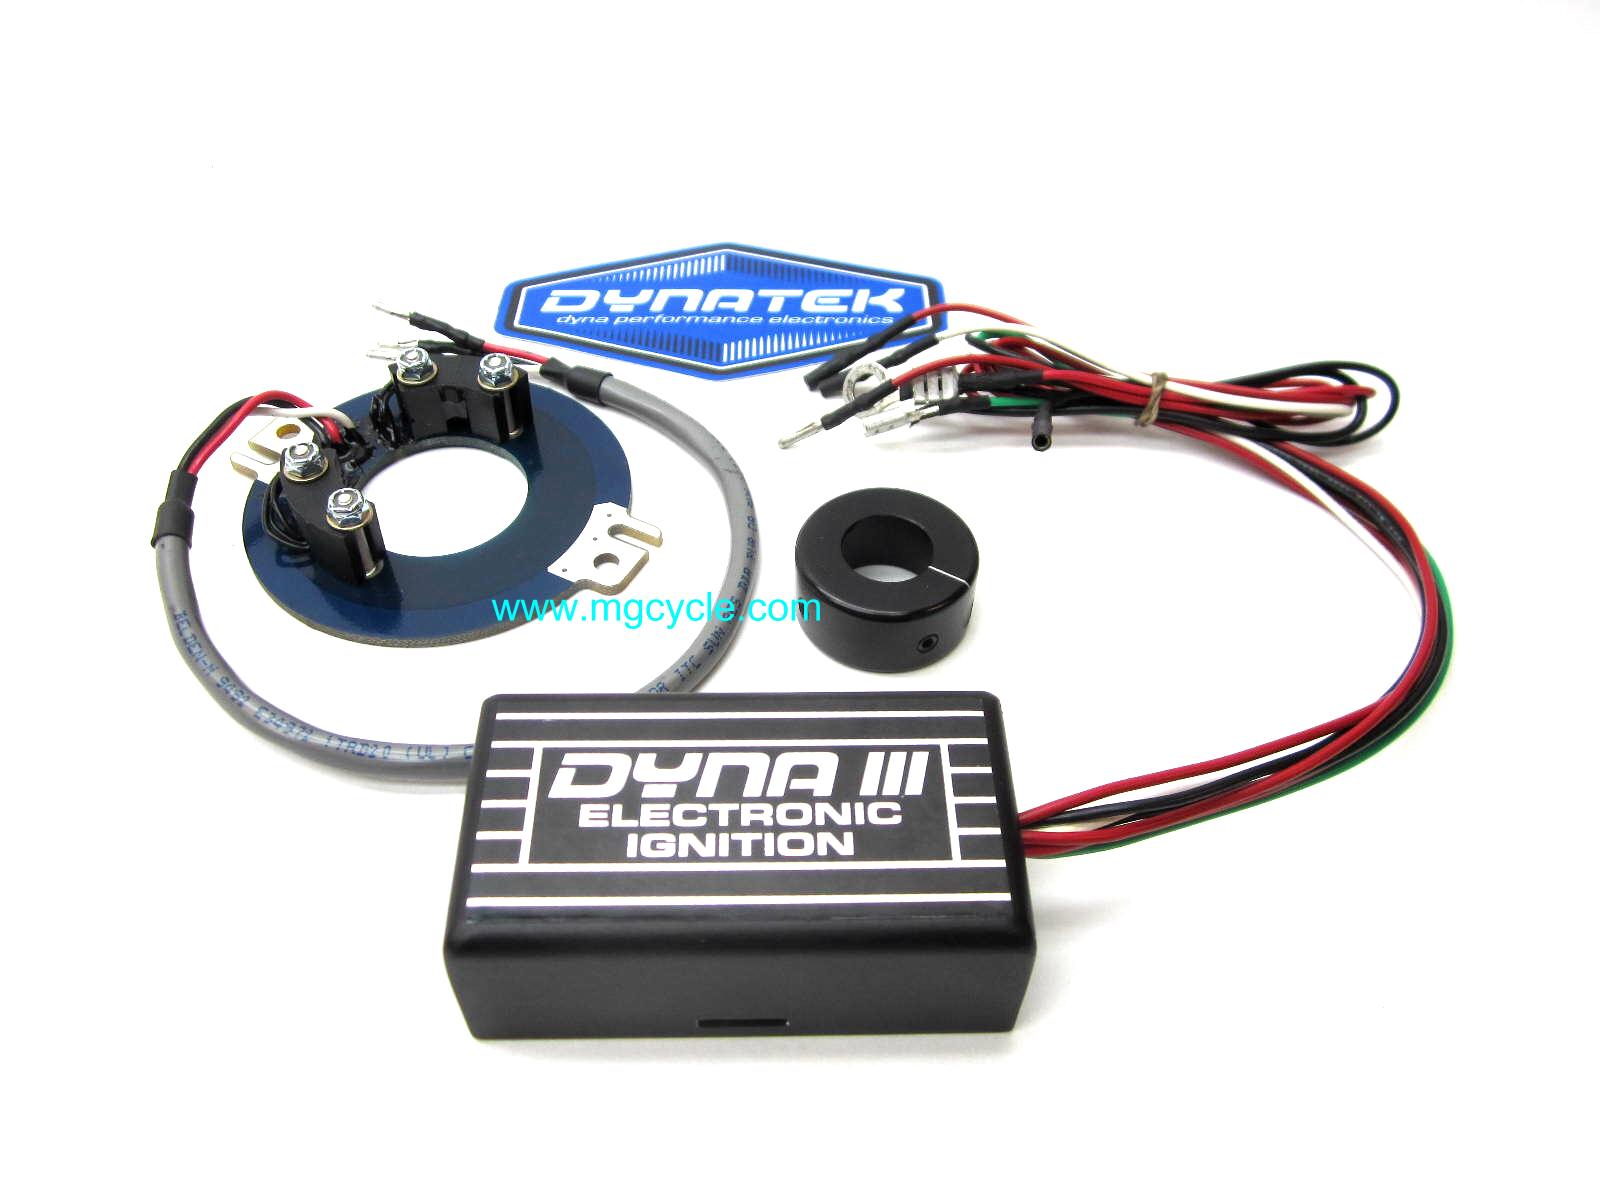 DYNA III electronic ignition, twin point big twins - Click Image to Close